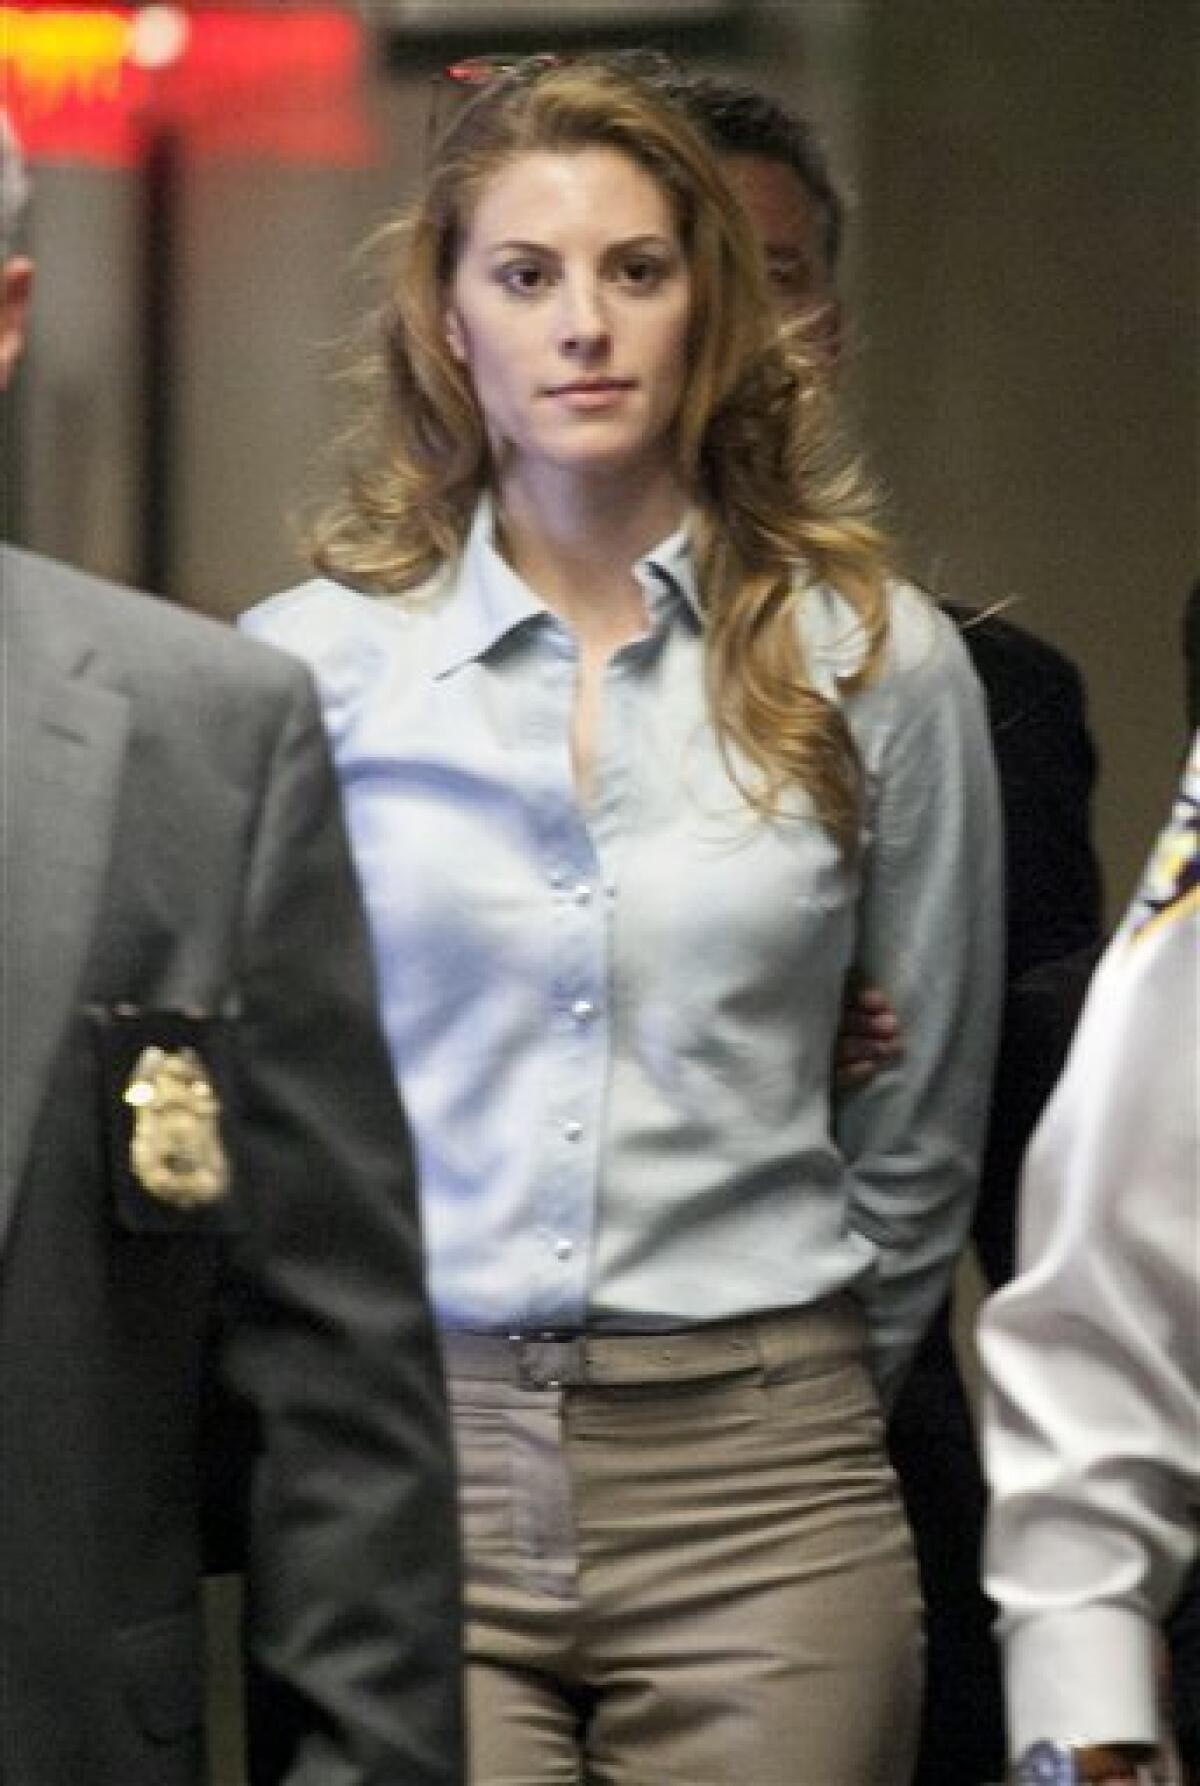 Jaynie Mae Baker arrives with court officers and legal counsel for her arraignment in State Supreme Court, Tuesday, March 13, 2012 in New York. Baker is accused of working for a high-priced brothel. (AP Photo/Mark Lennihan)